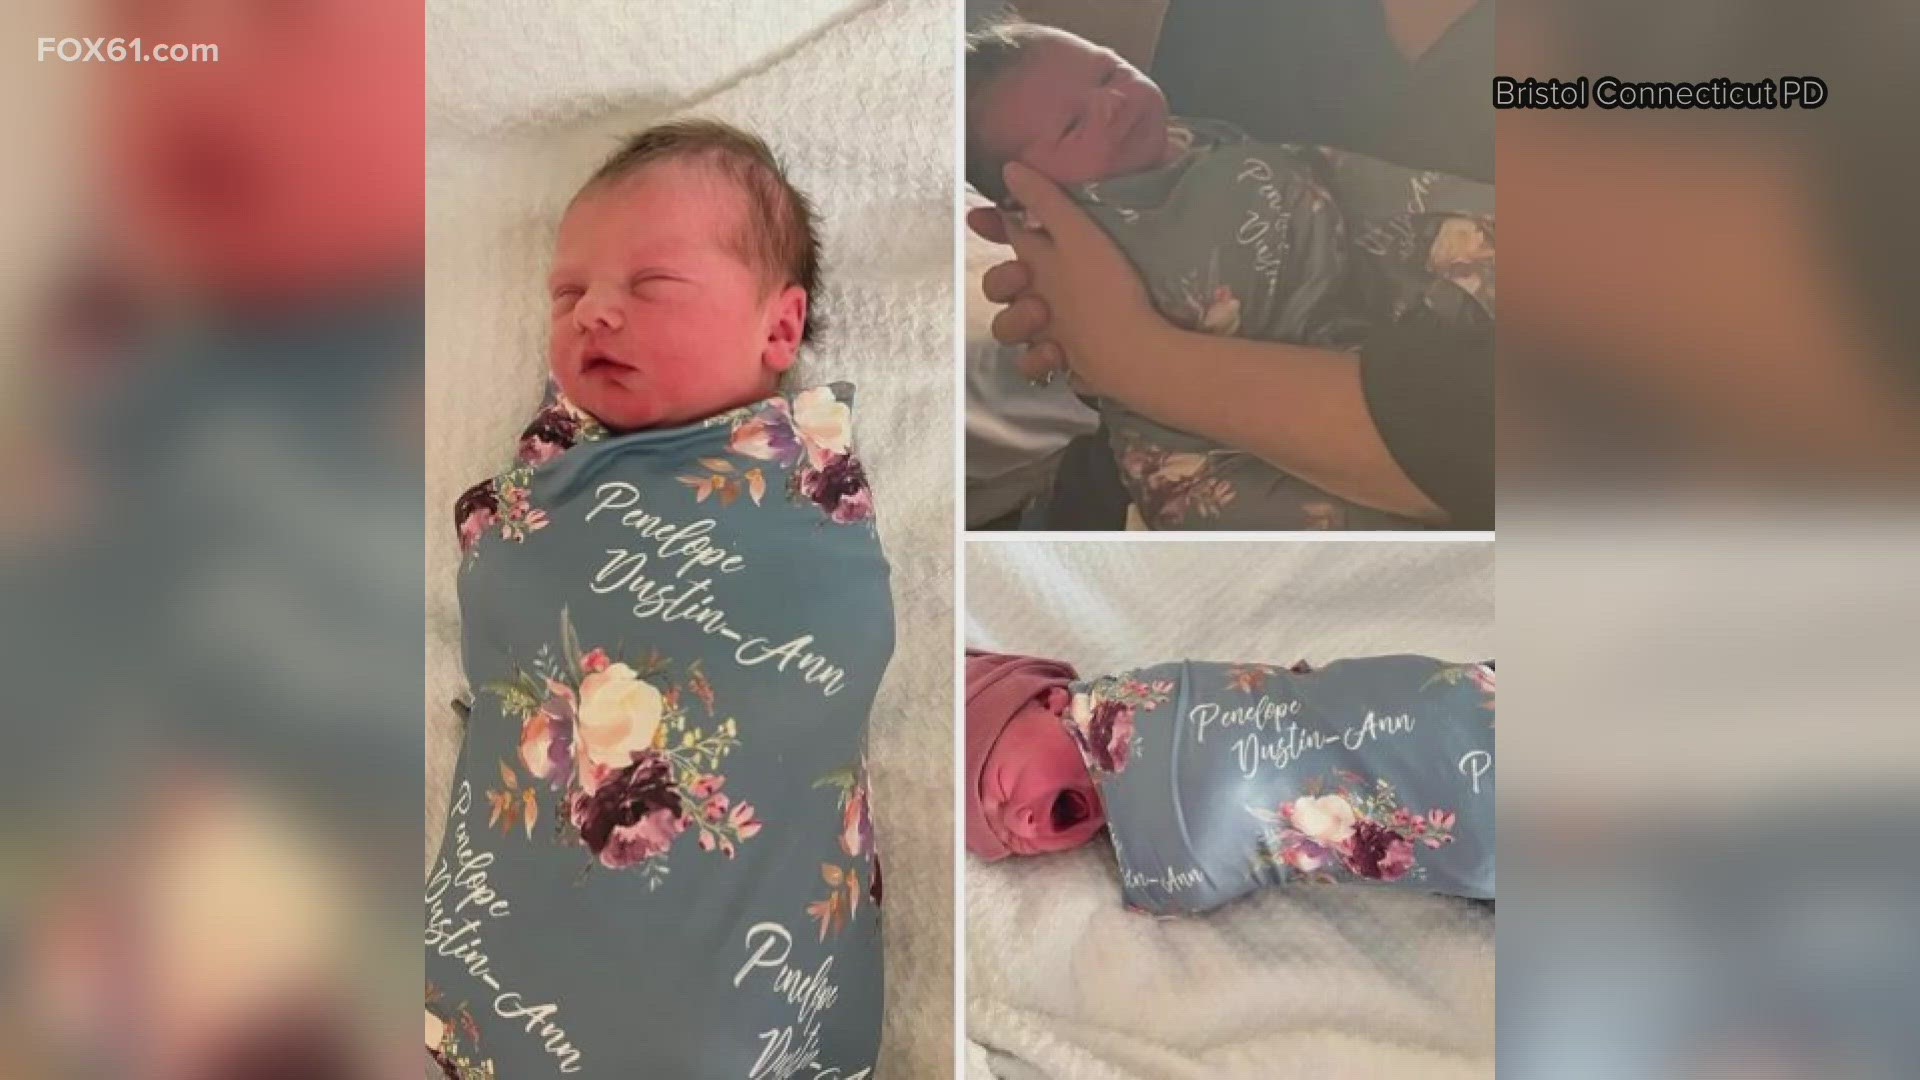 Laura DeMonte gave birth to Penelope Dustin-Ann DeMonte just after 12:30 p.m. Officers of the department were outside the hospital to greet them.